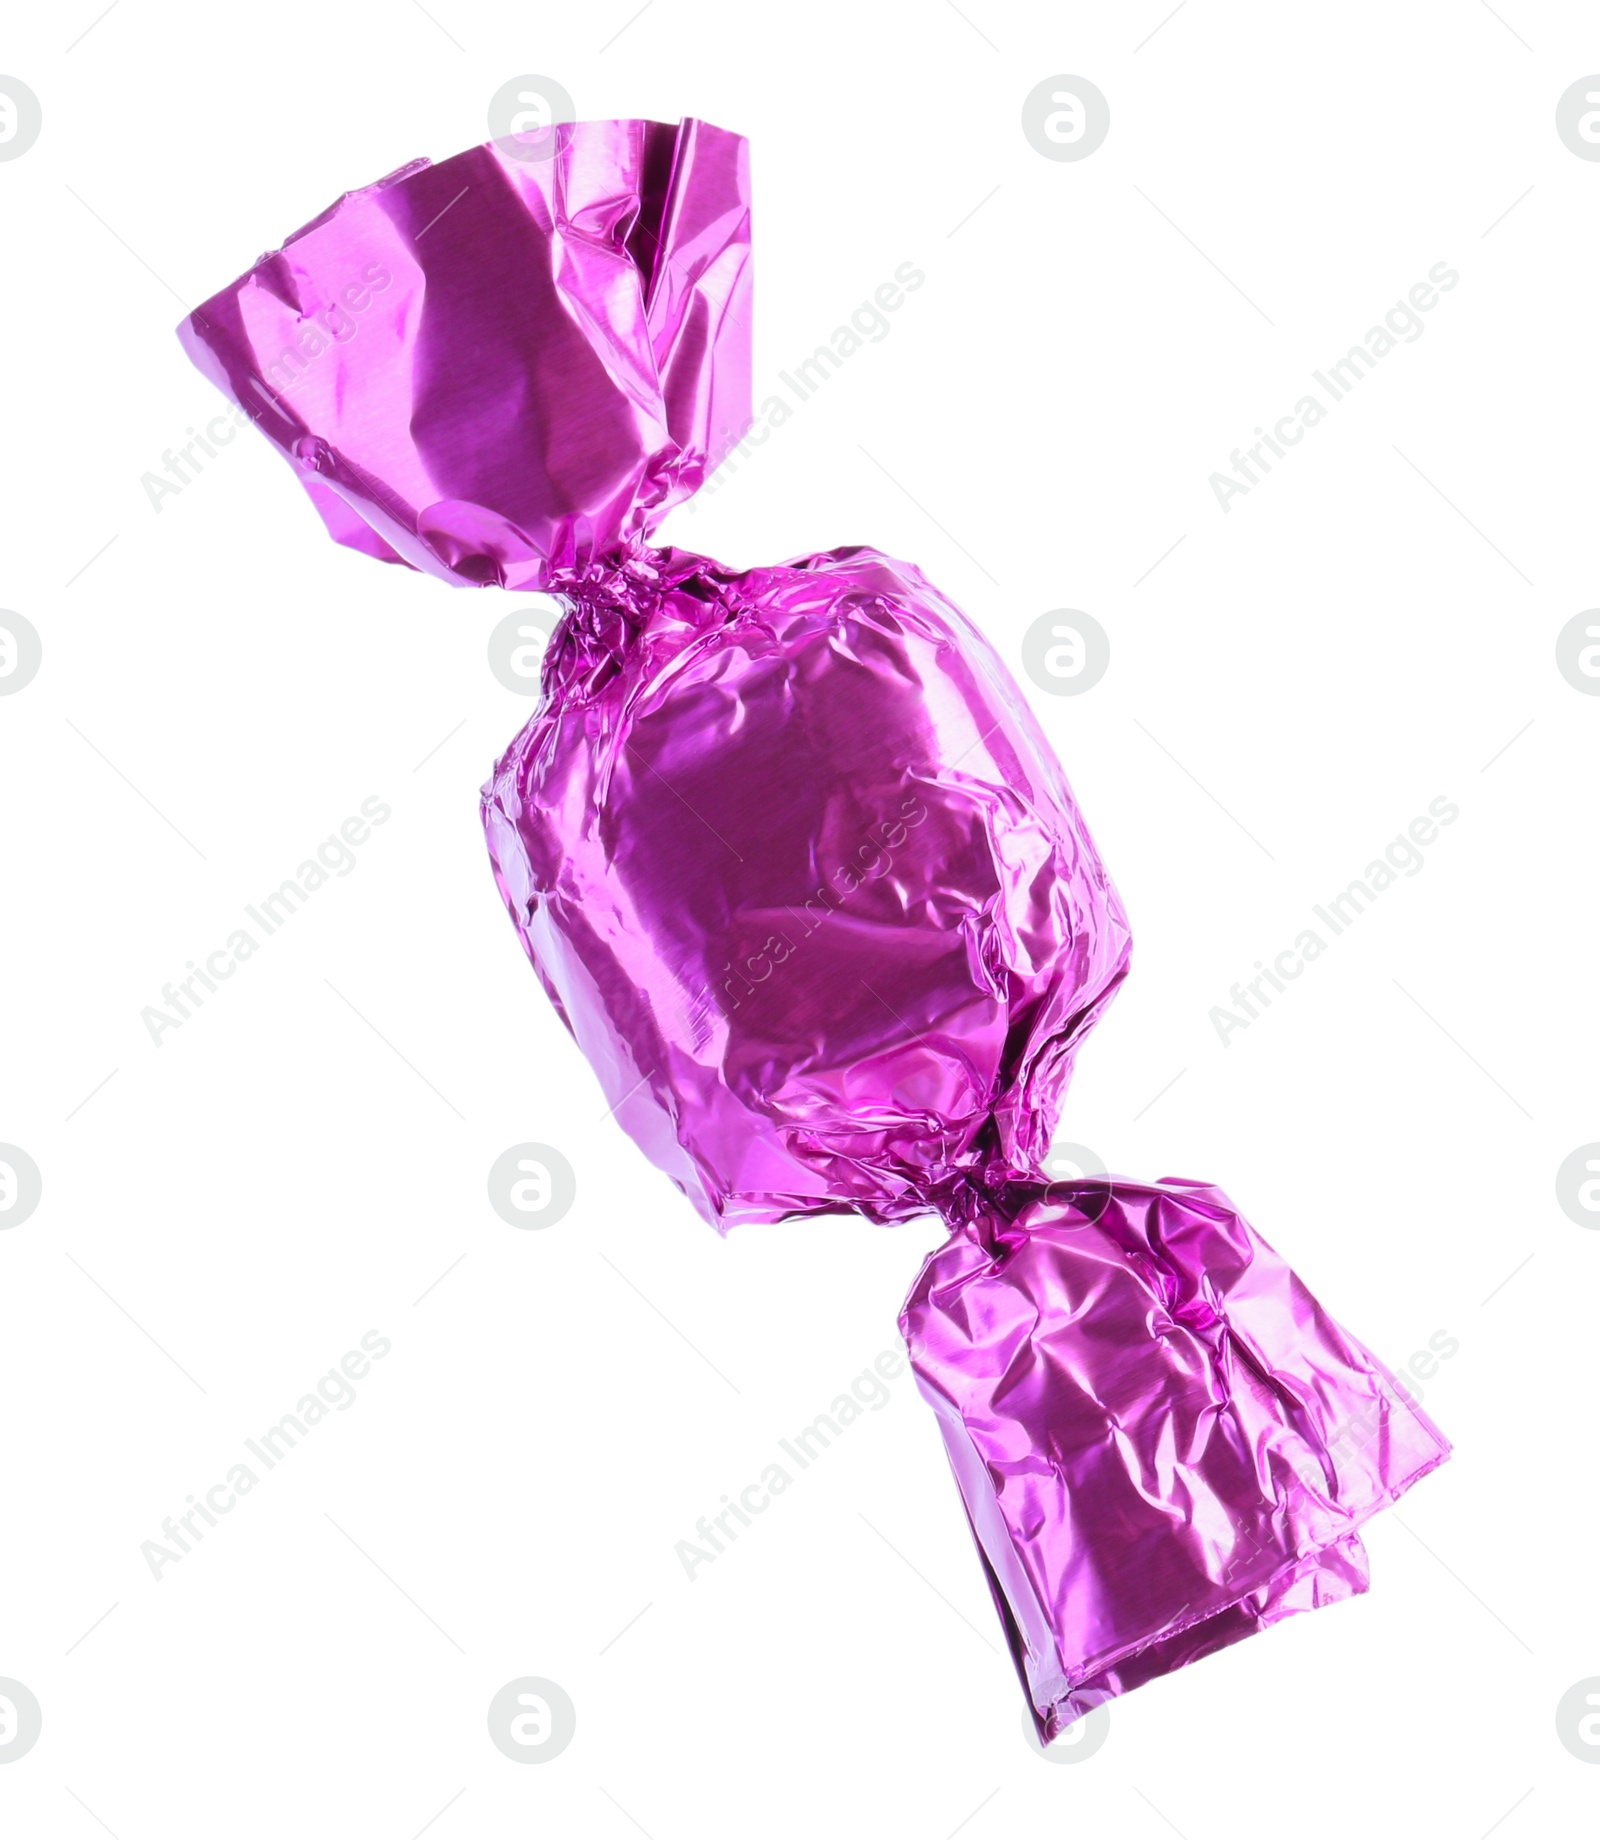 Photo of Tasty candy in violet wrapper isolated on white